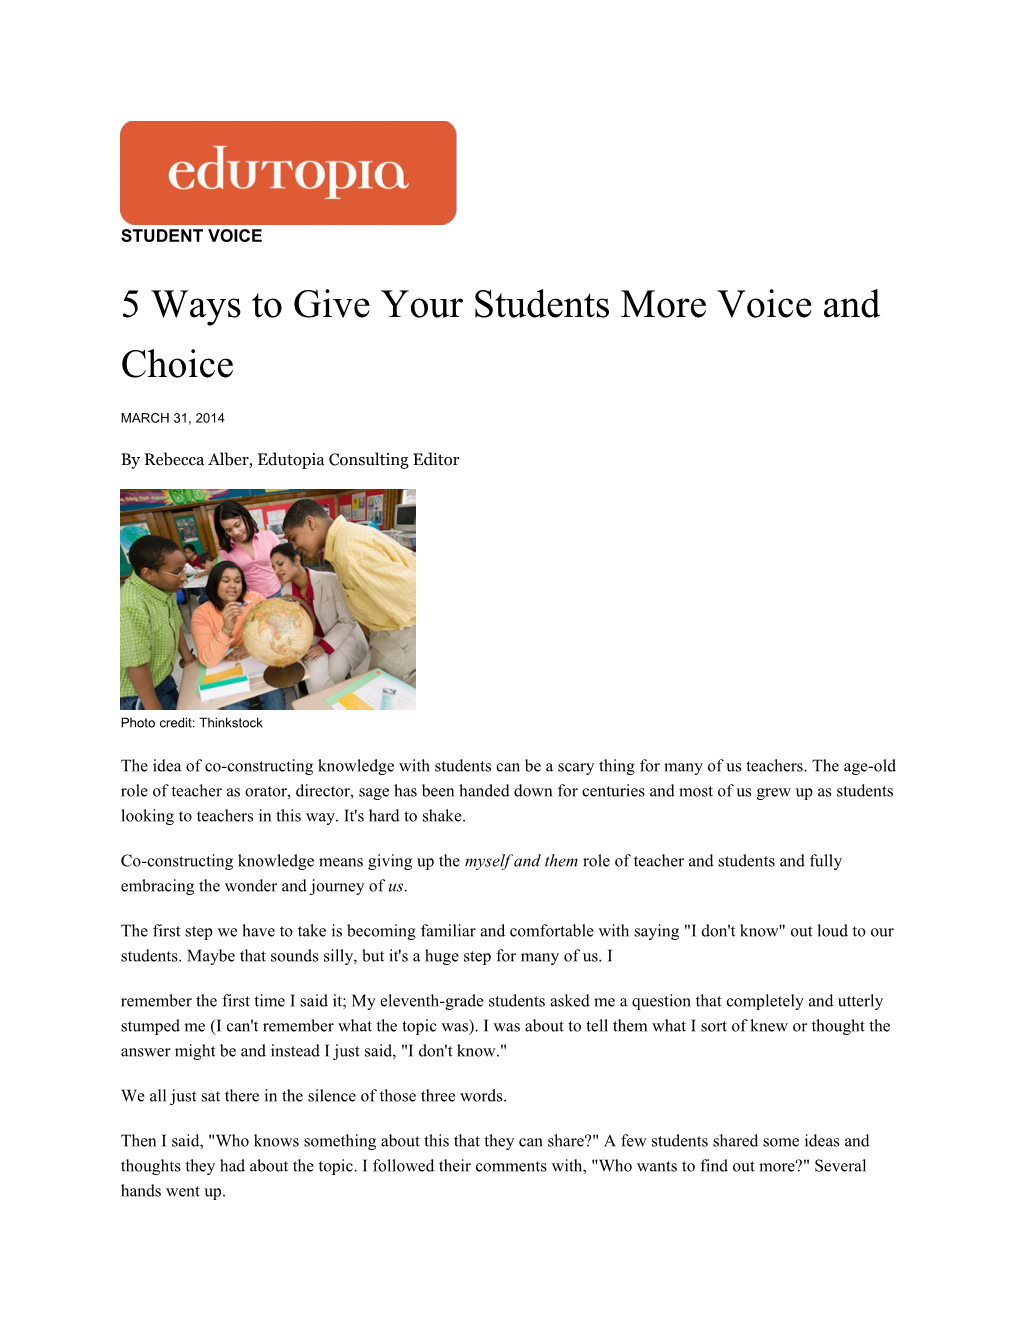 5 Ways to Give Your Students More Voice and Choice